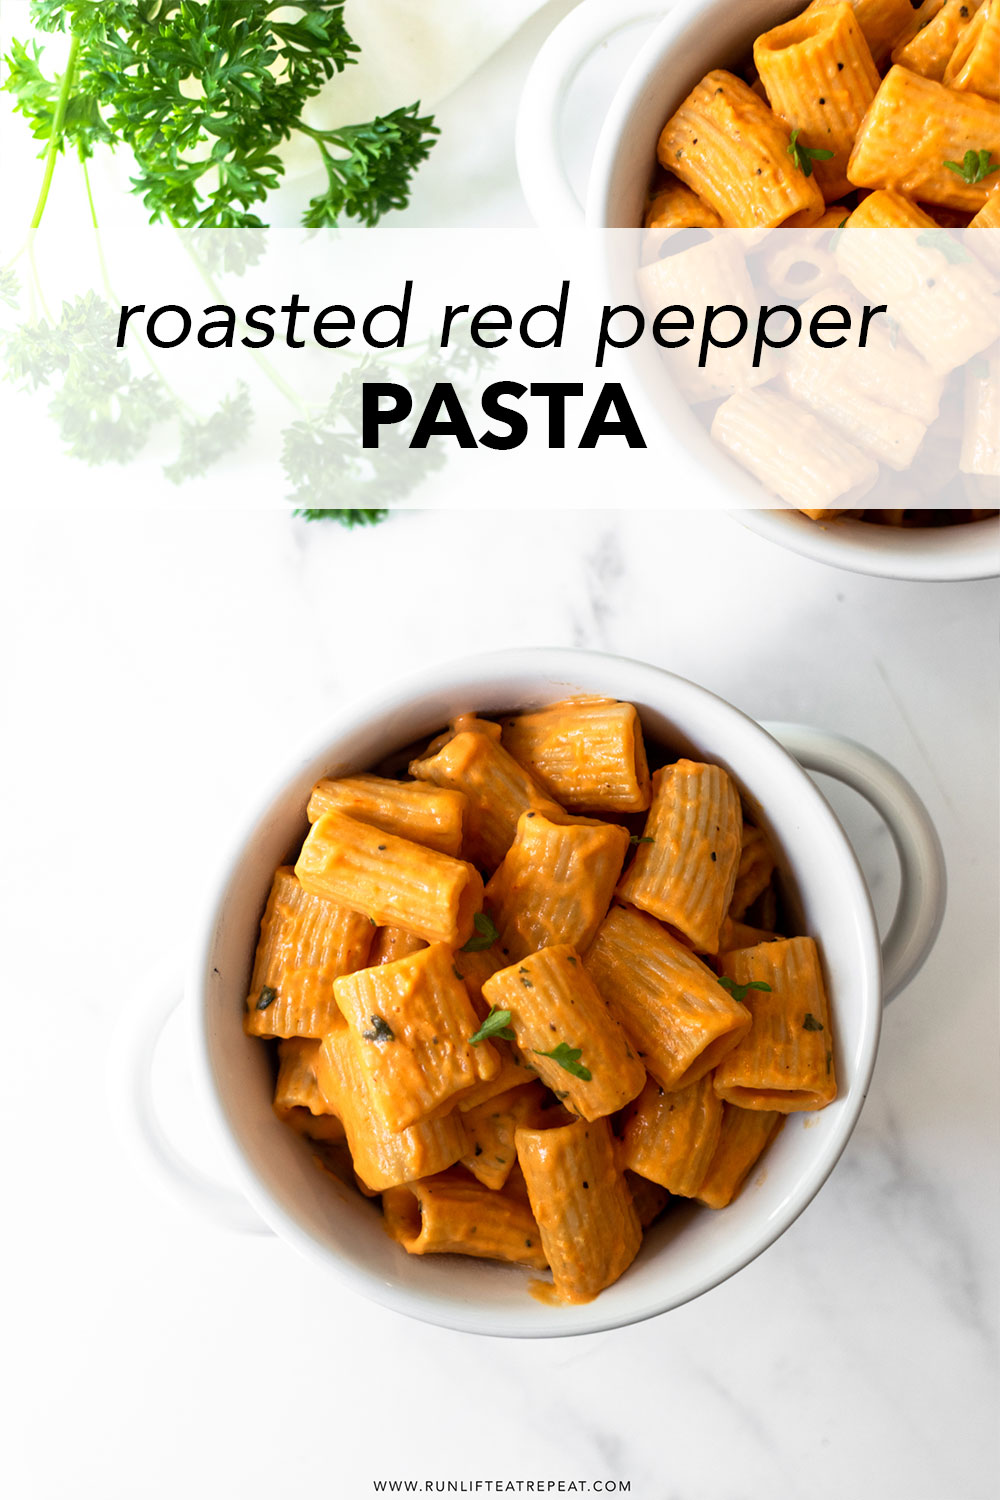 This creamy roasted red pepper pasta stands above the rest— easy to pull together and quick for busy nights. With roasting the peppers, onions and garlic, there's layers of flavor with minimal ingredients. A must-try recipe that the family will love!